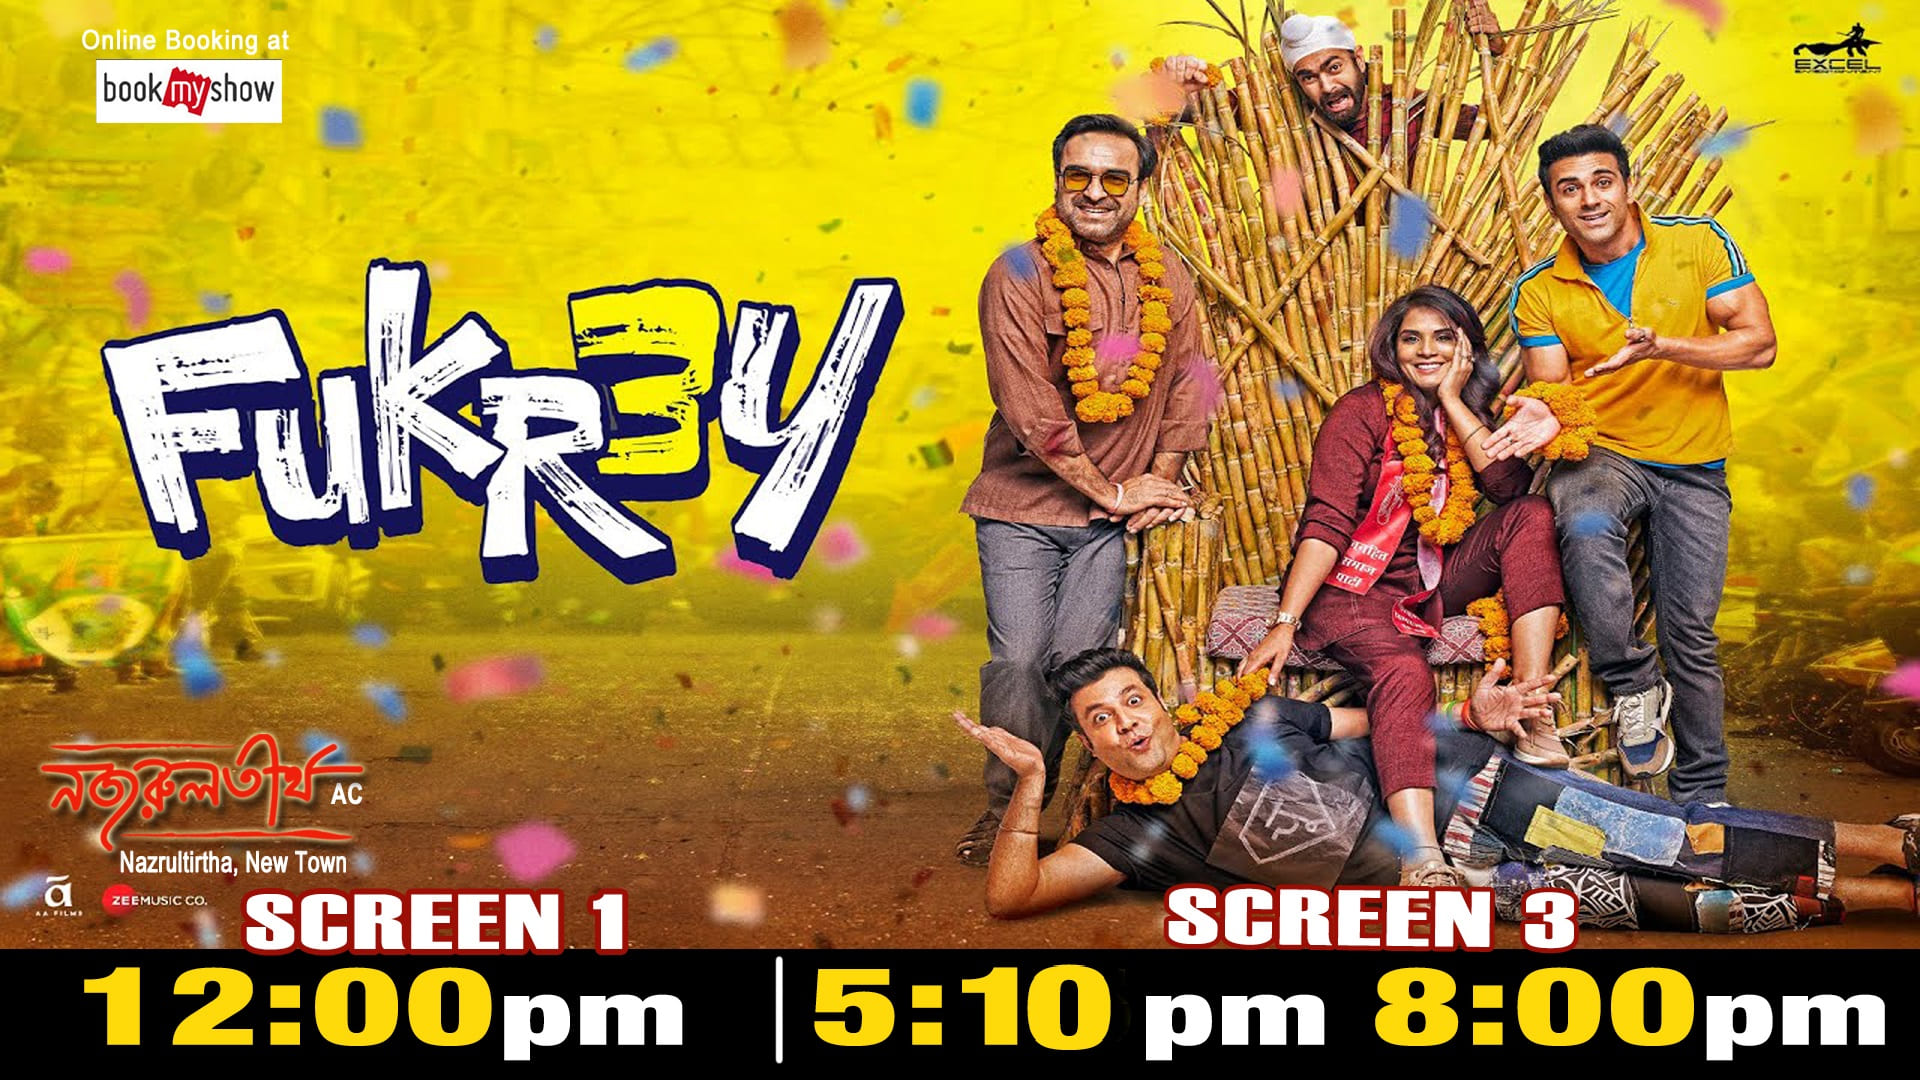 http://nazrultirtha.co.in/upload_file/upcoming_events/FUKREY 3 (Hindi) 